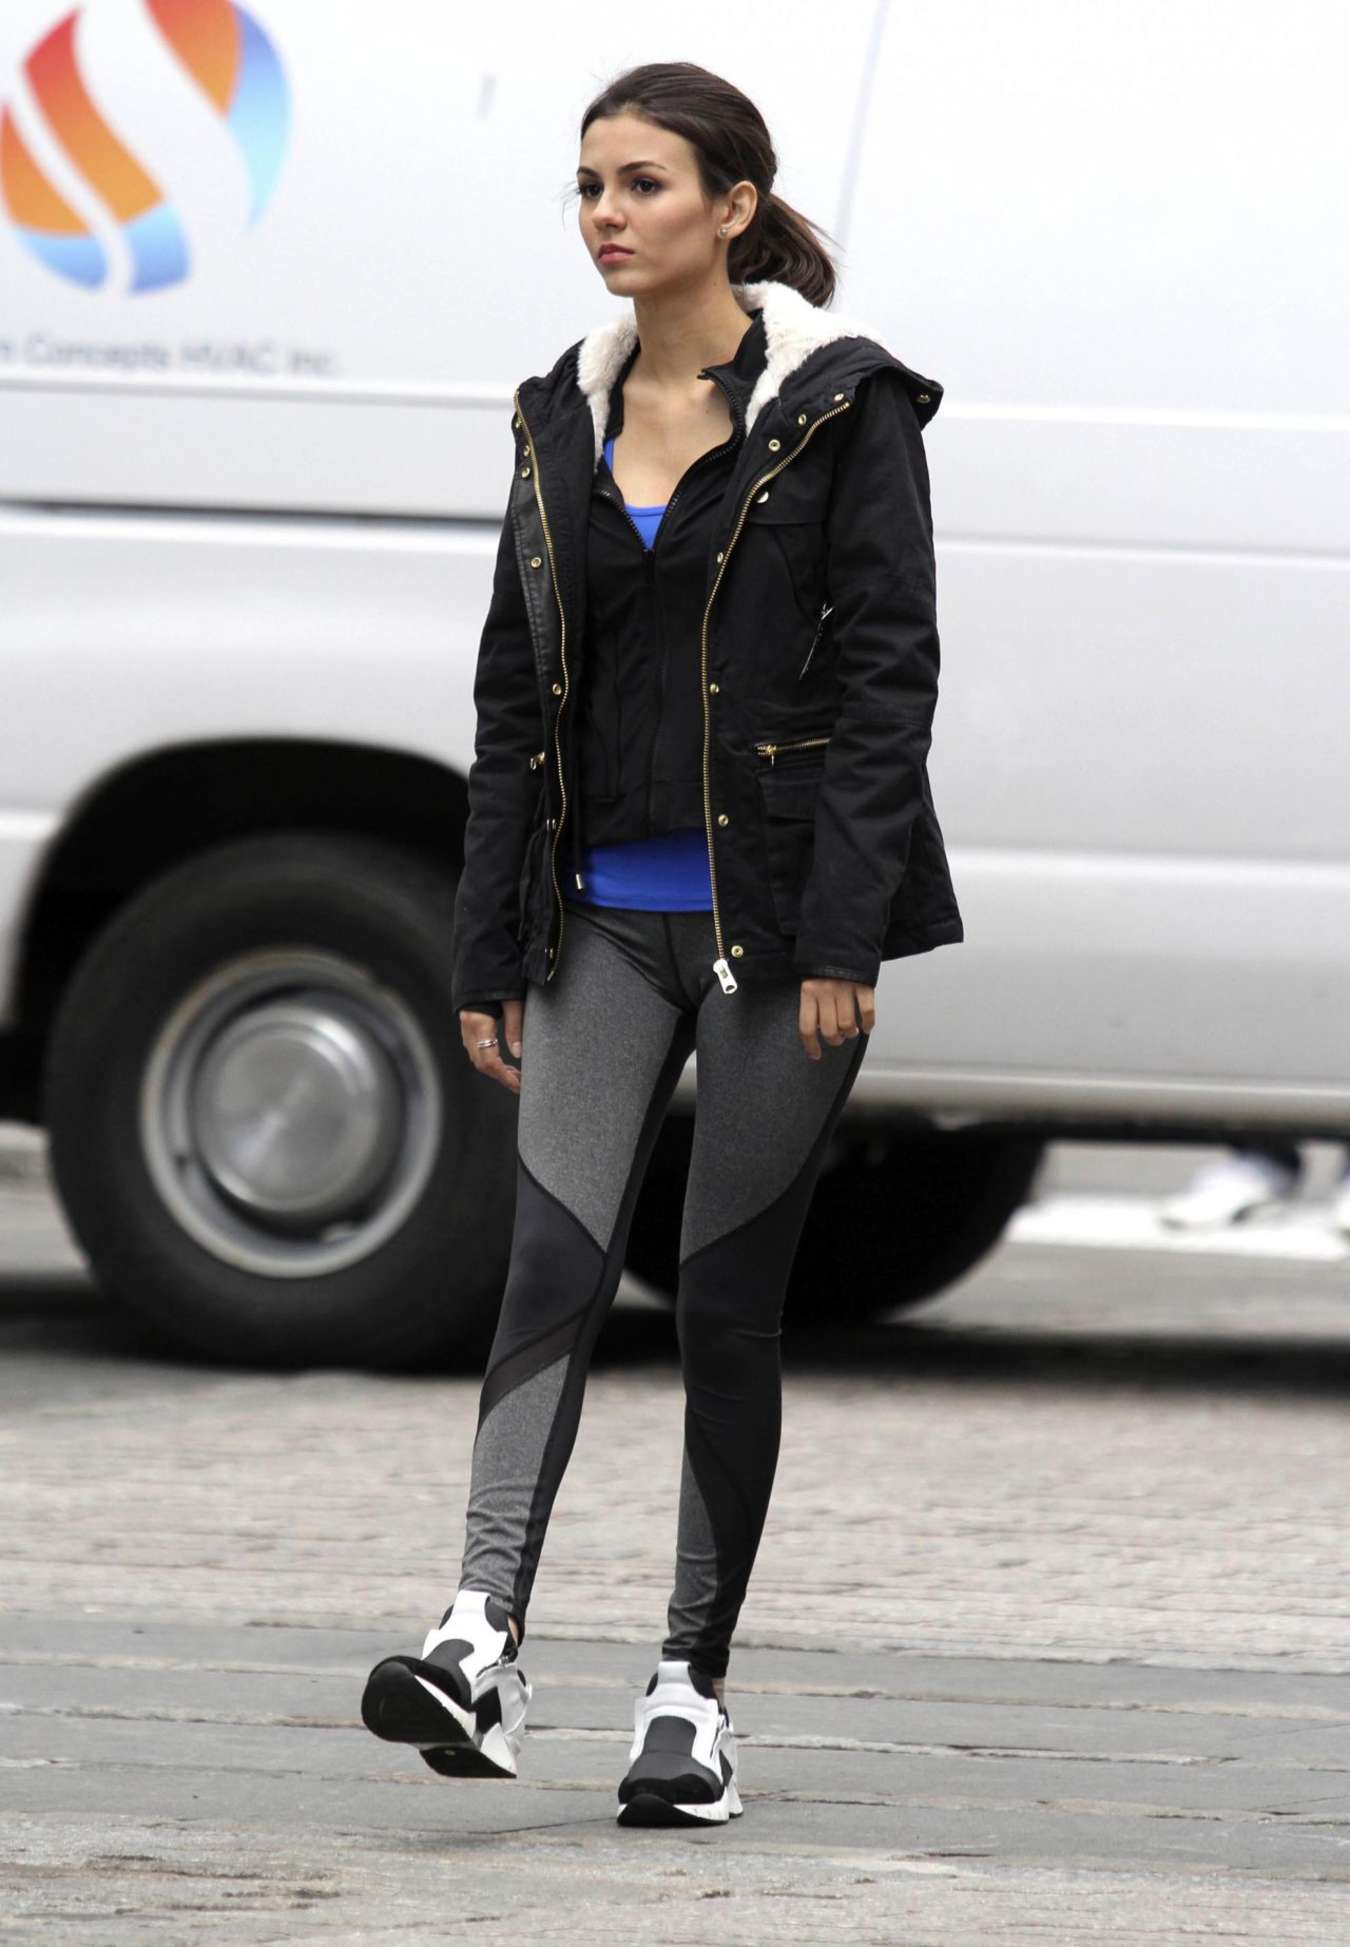 Victoria Justice in Leggings on the set for 'Eye Candy' in